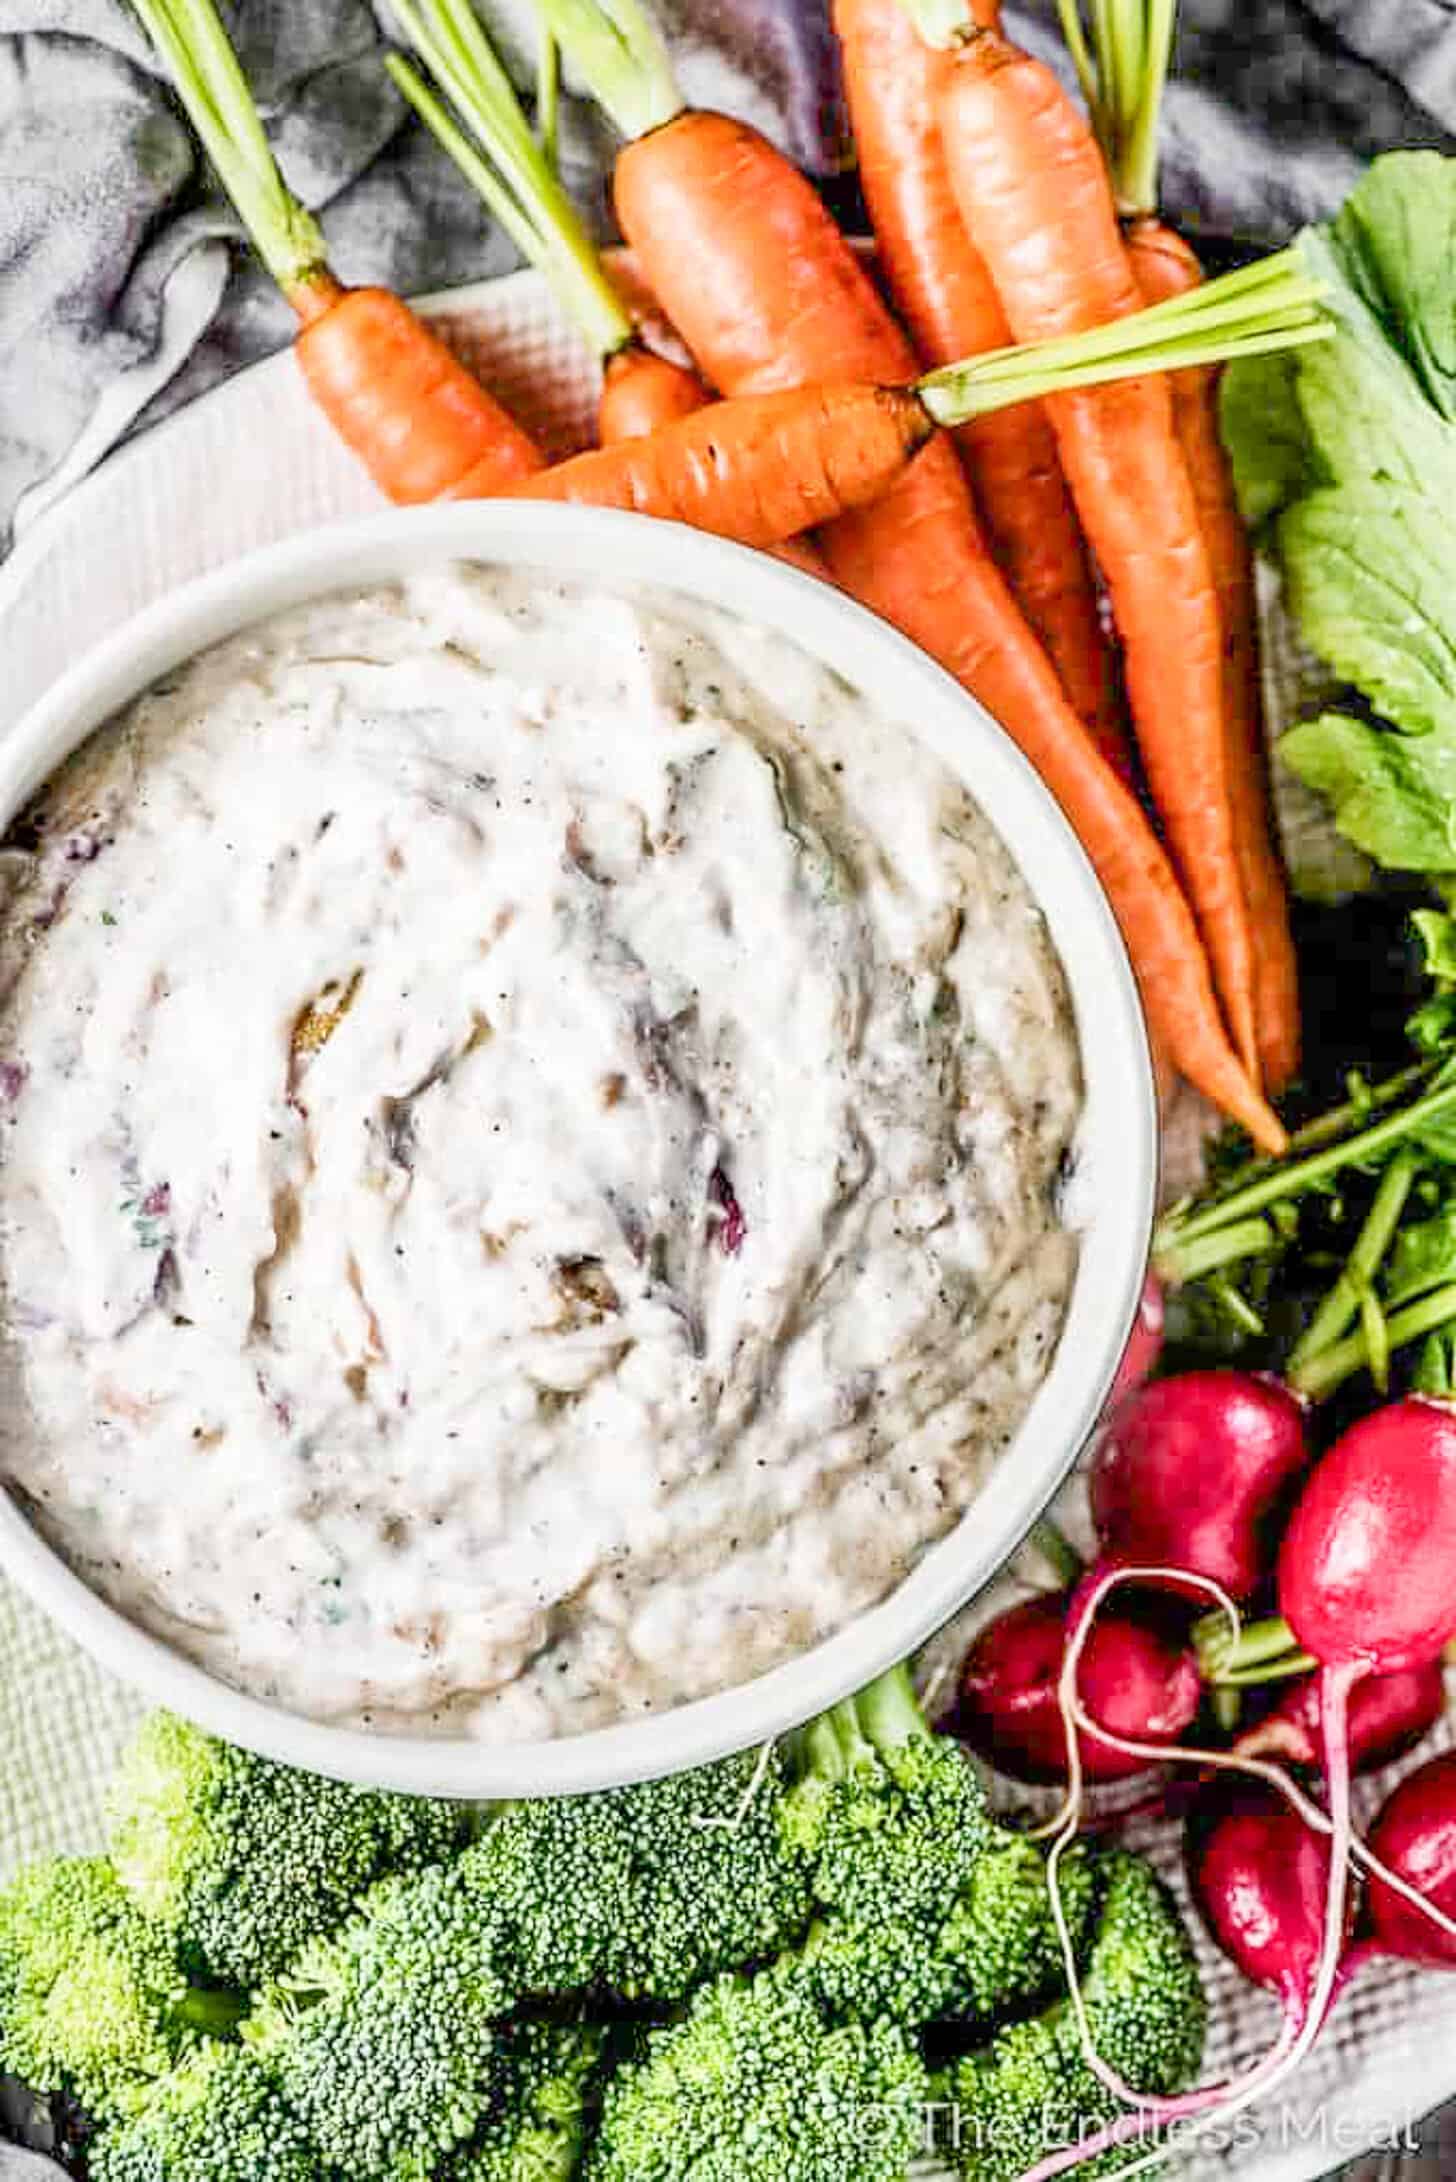 Roasted Onion Dip on a plate with veggies